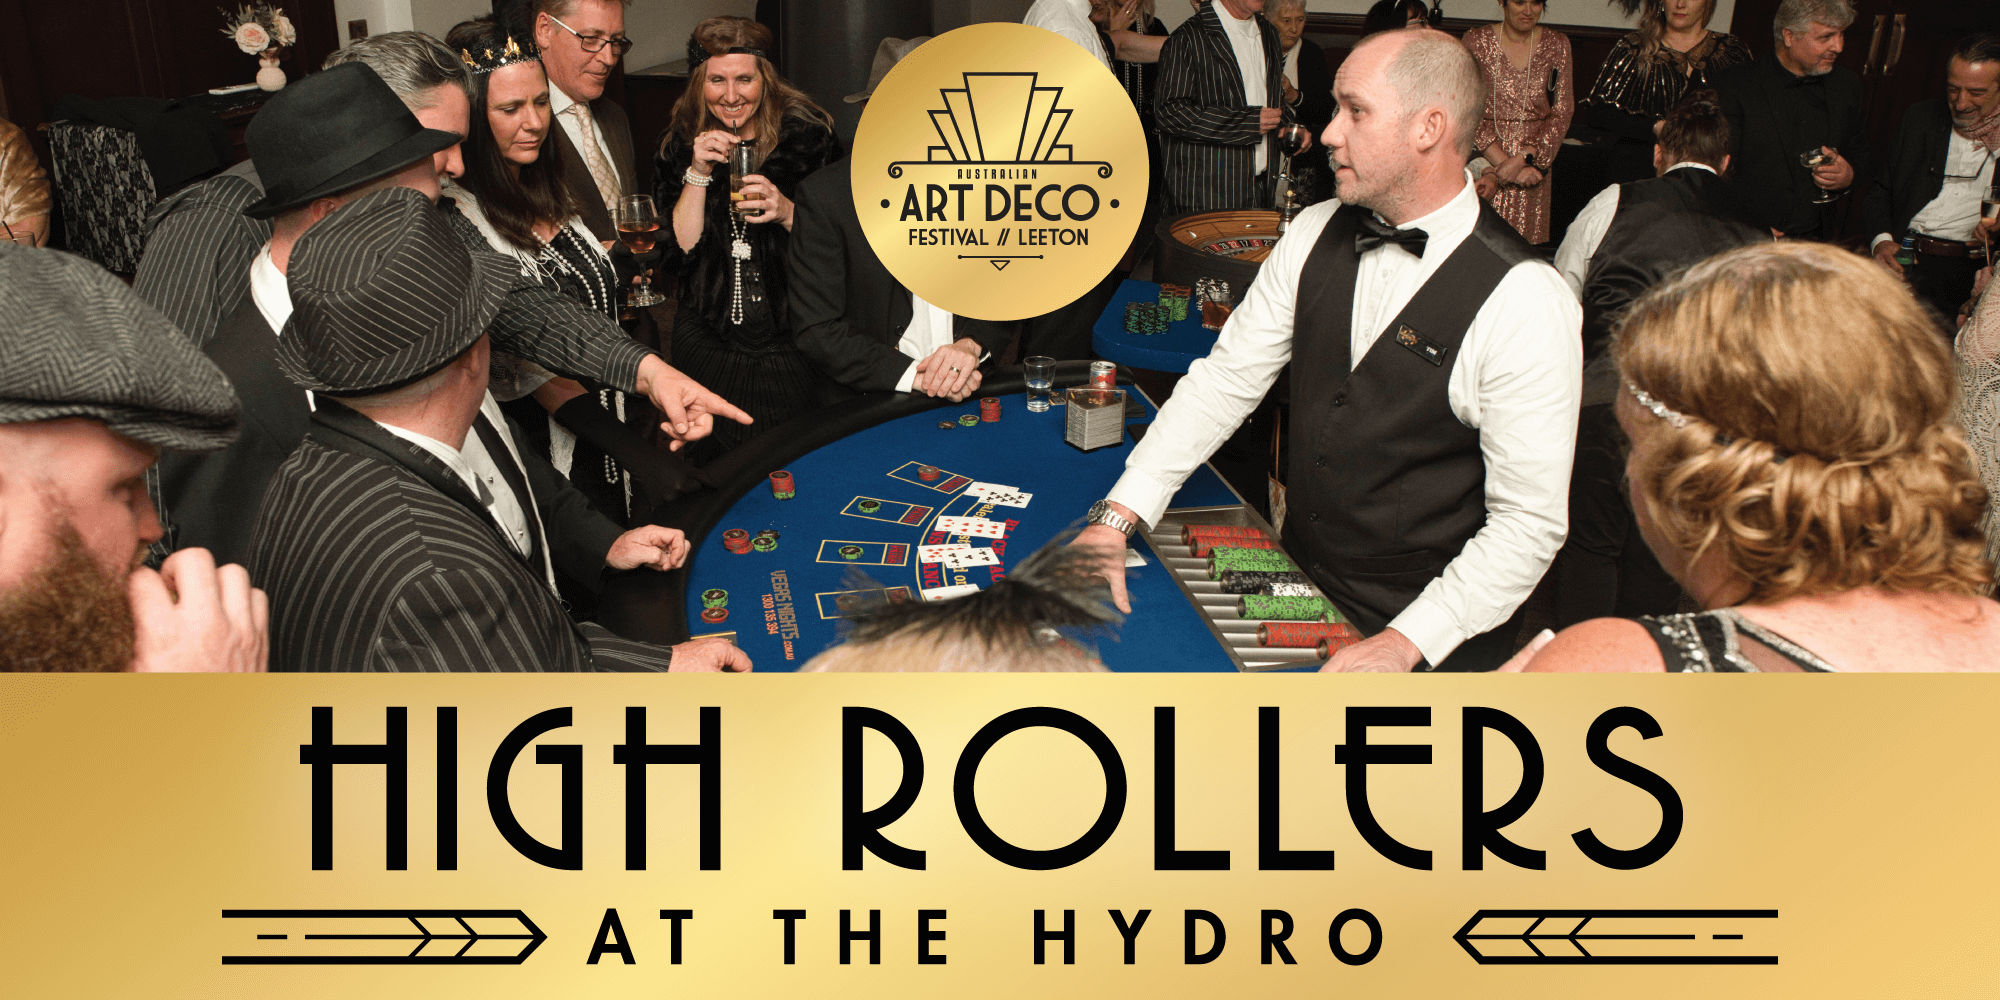 art deco festival event high rollers at the hydro casino night.png